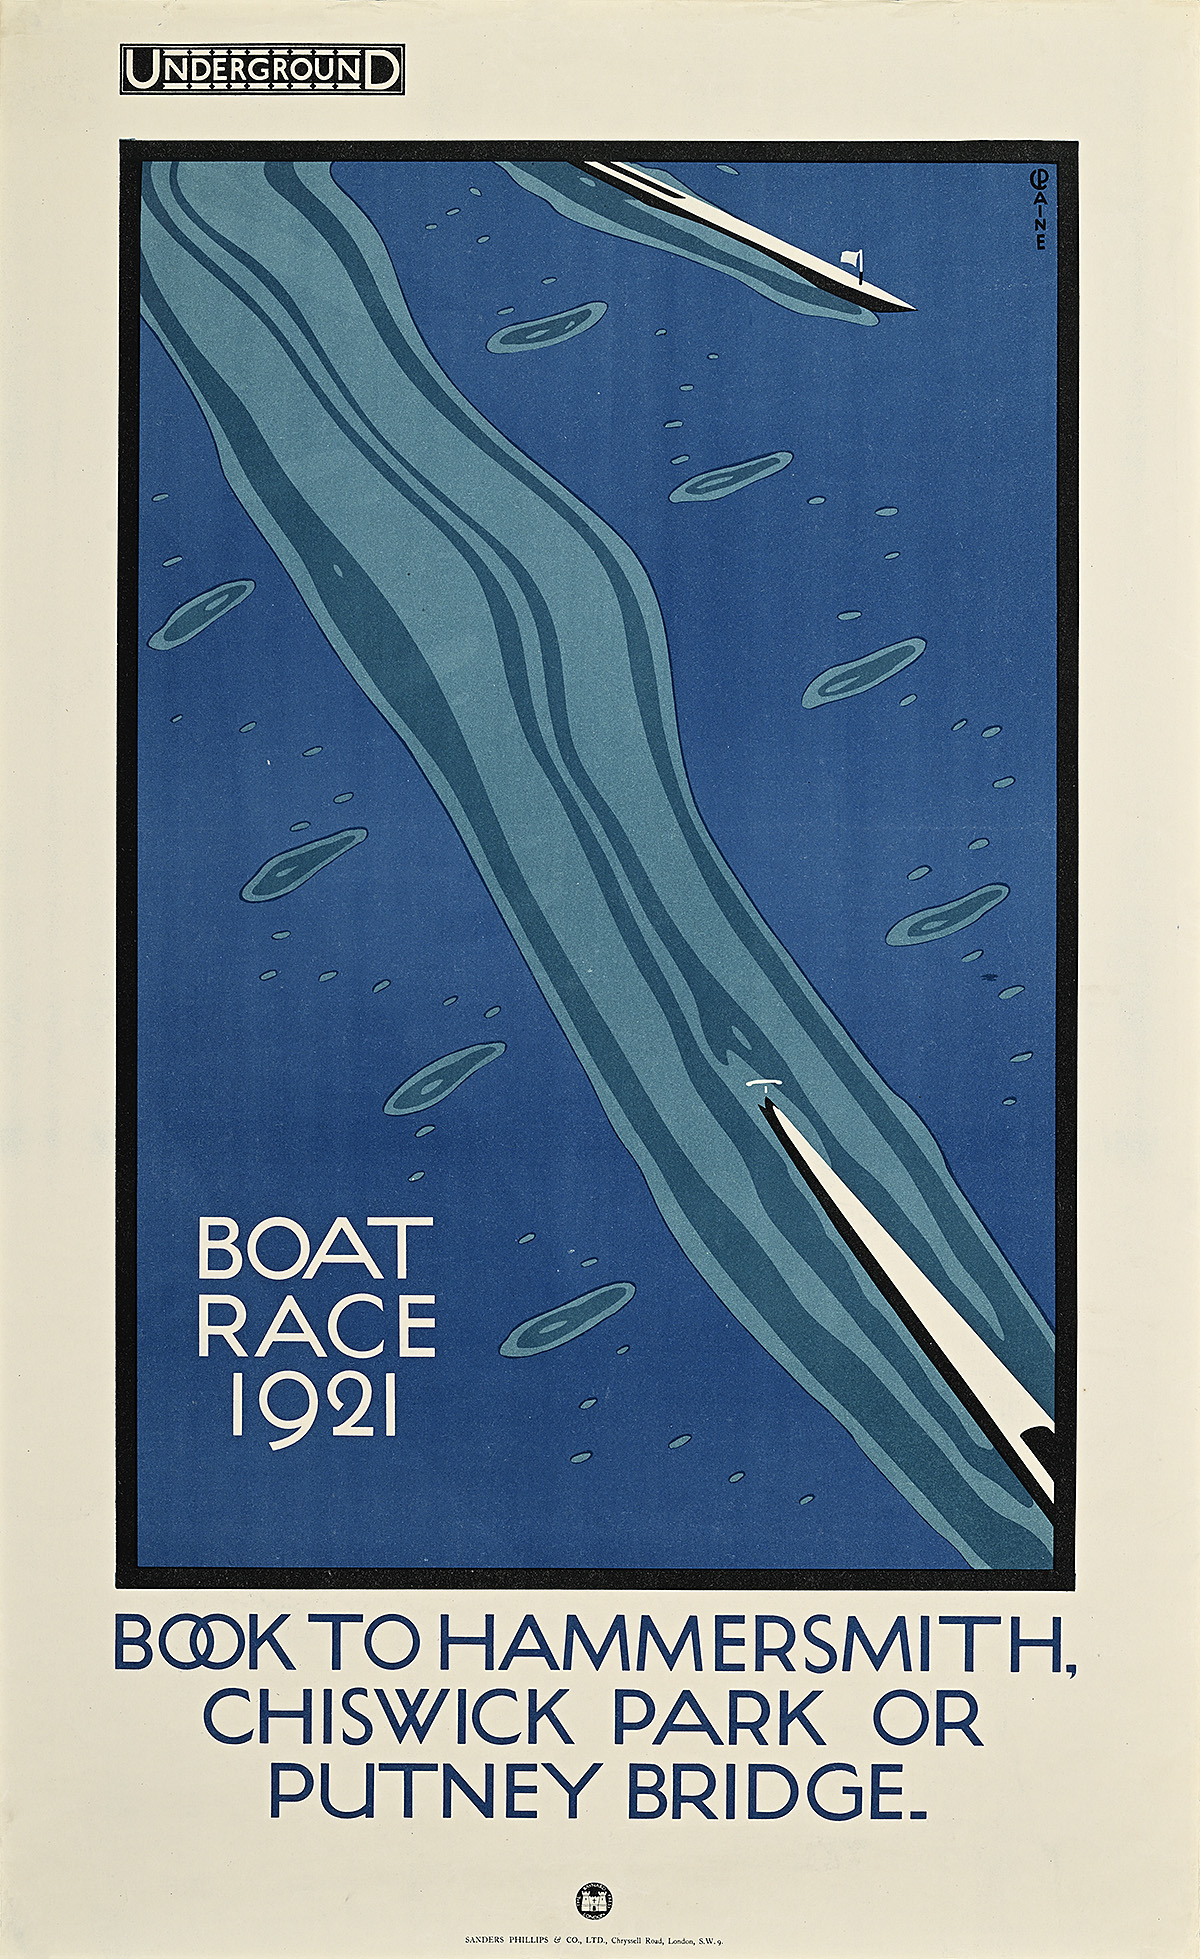 Poster of an overhead view of a body of water with a small trail from a boat skimming on the surface.